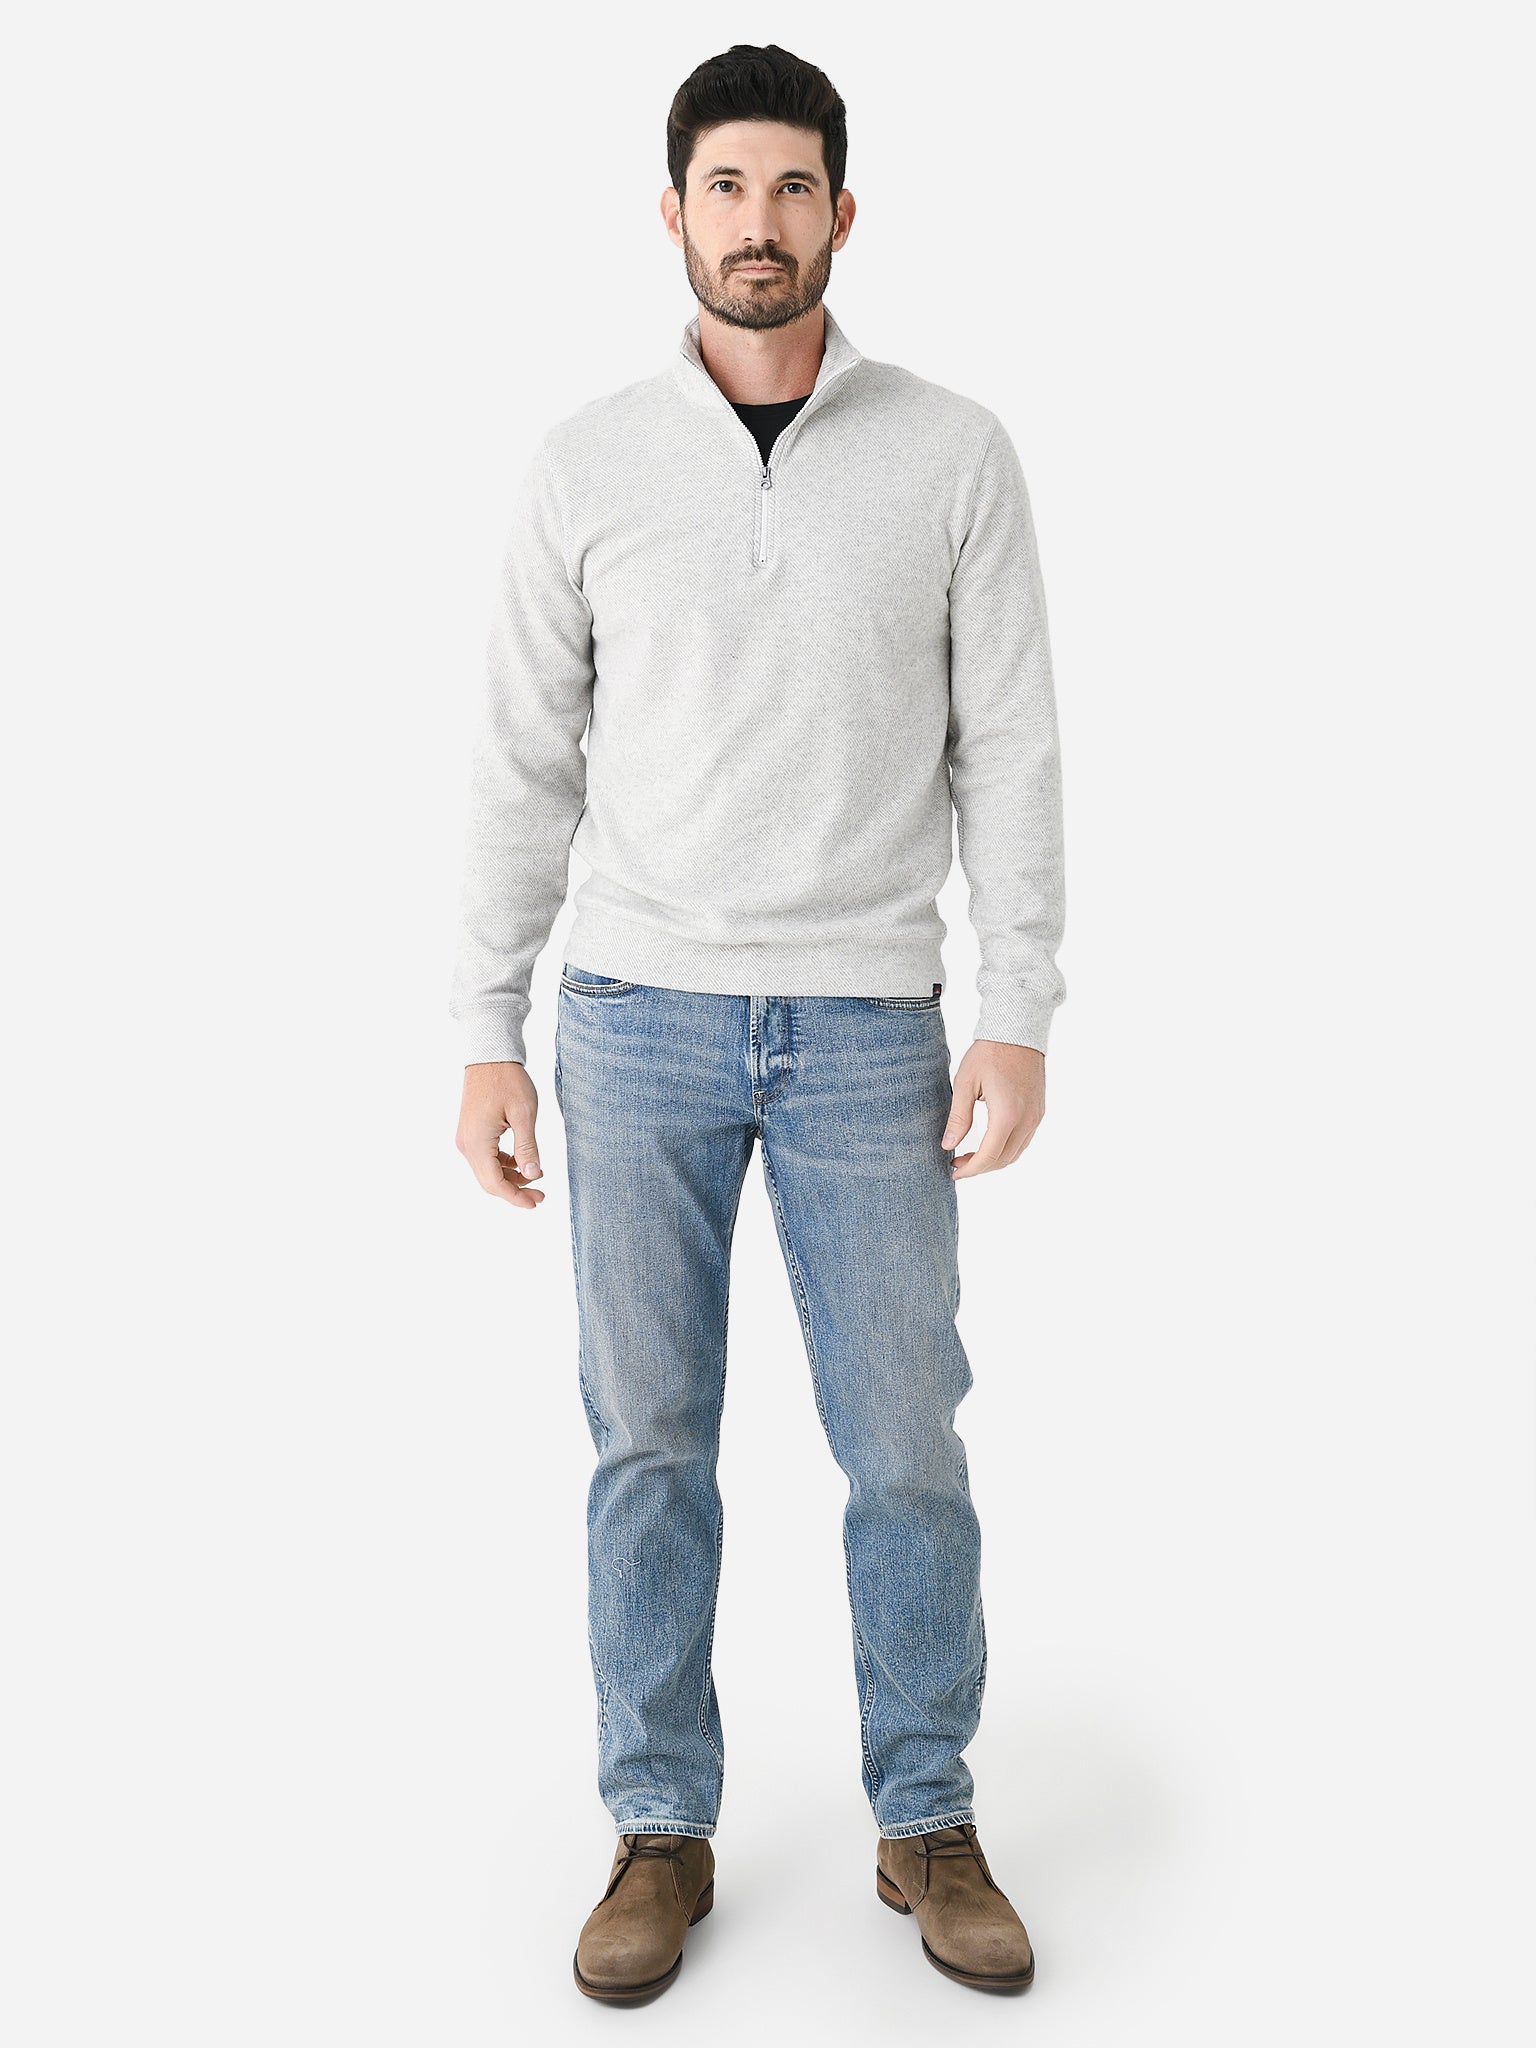 Faherty Brand Men's Legend Sweater $178 down to $76.30 in cart. Full size  run on many patterns, no code required. : r/frugalmalefashion